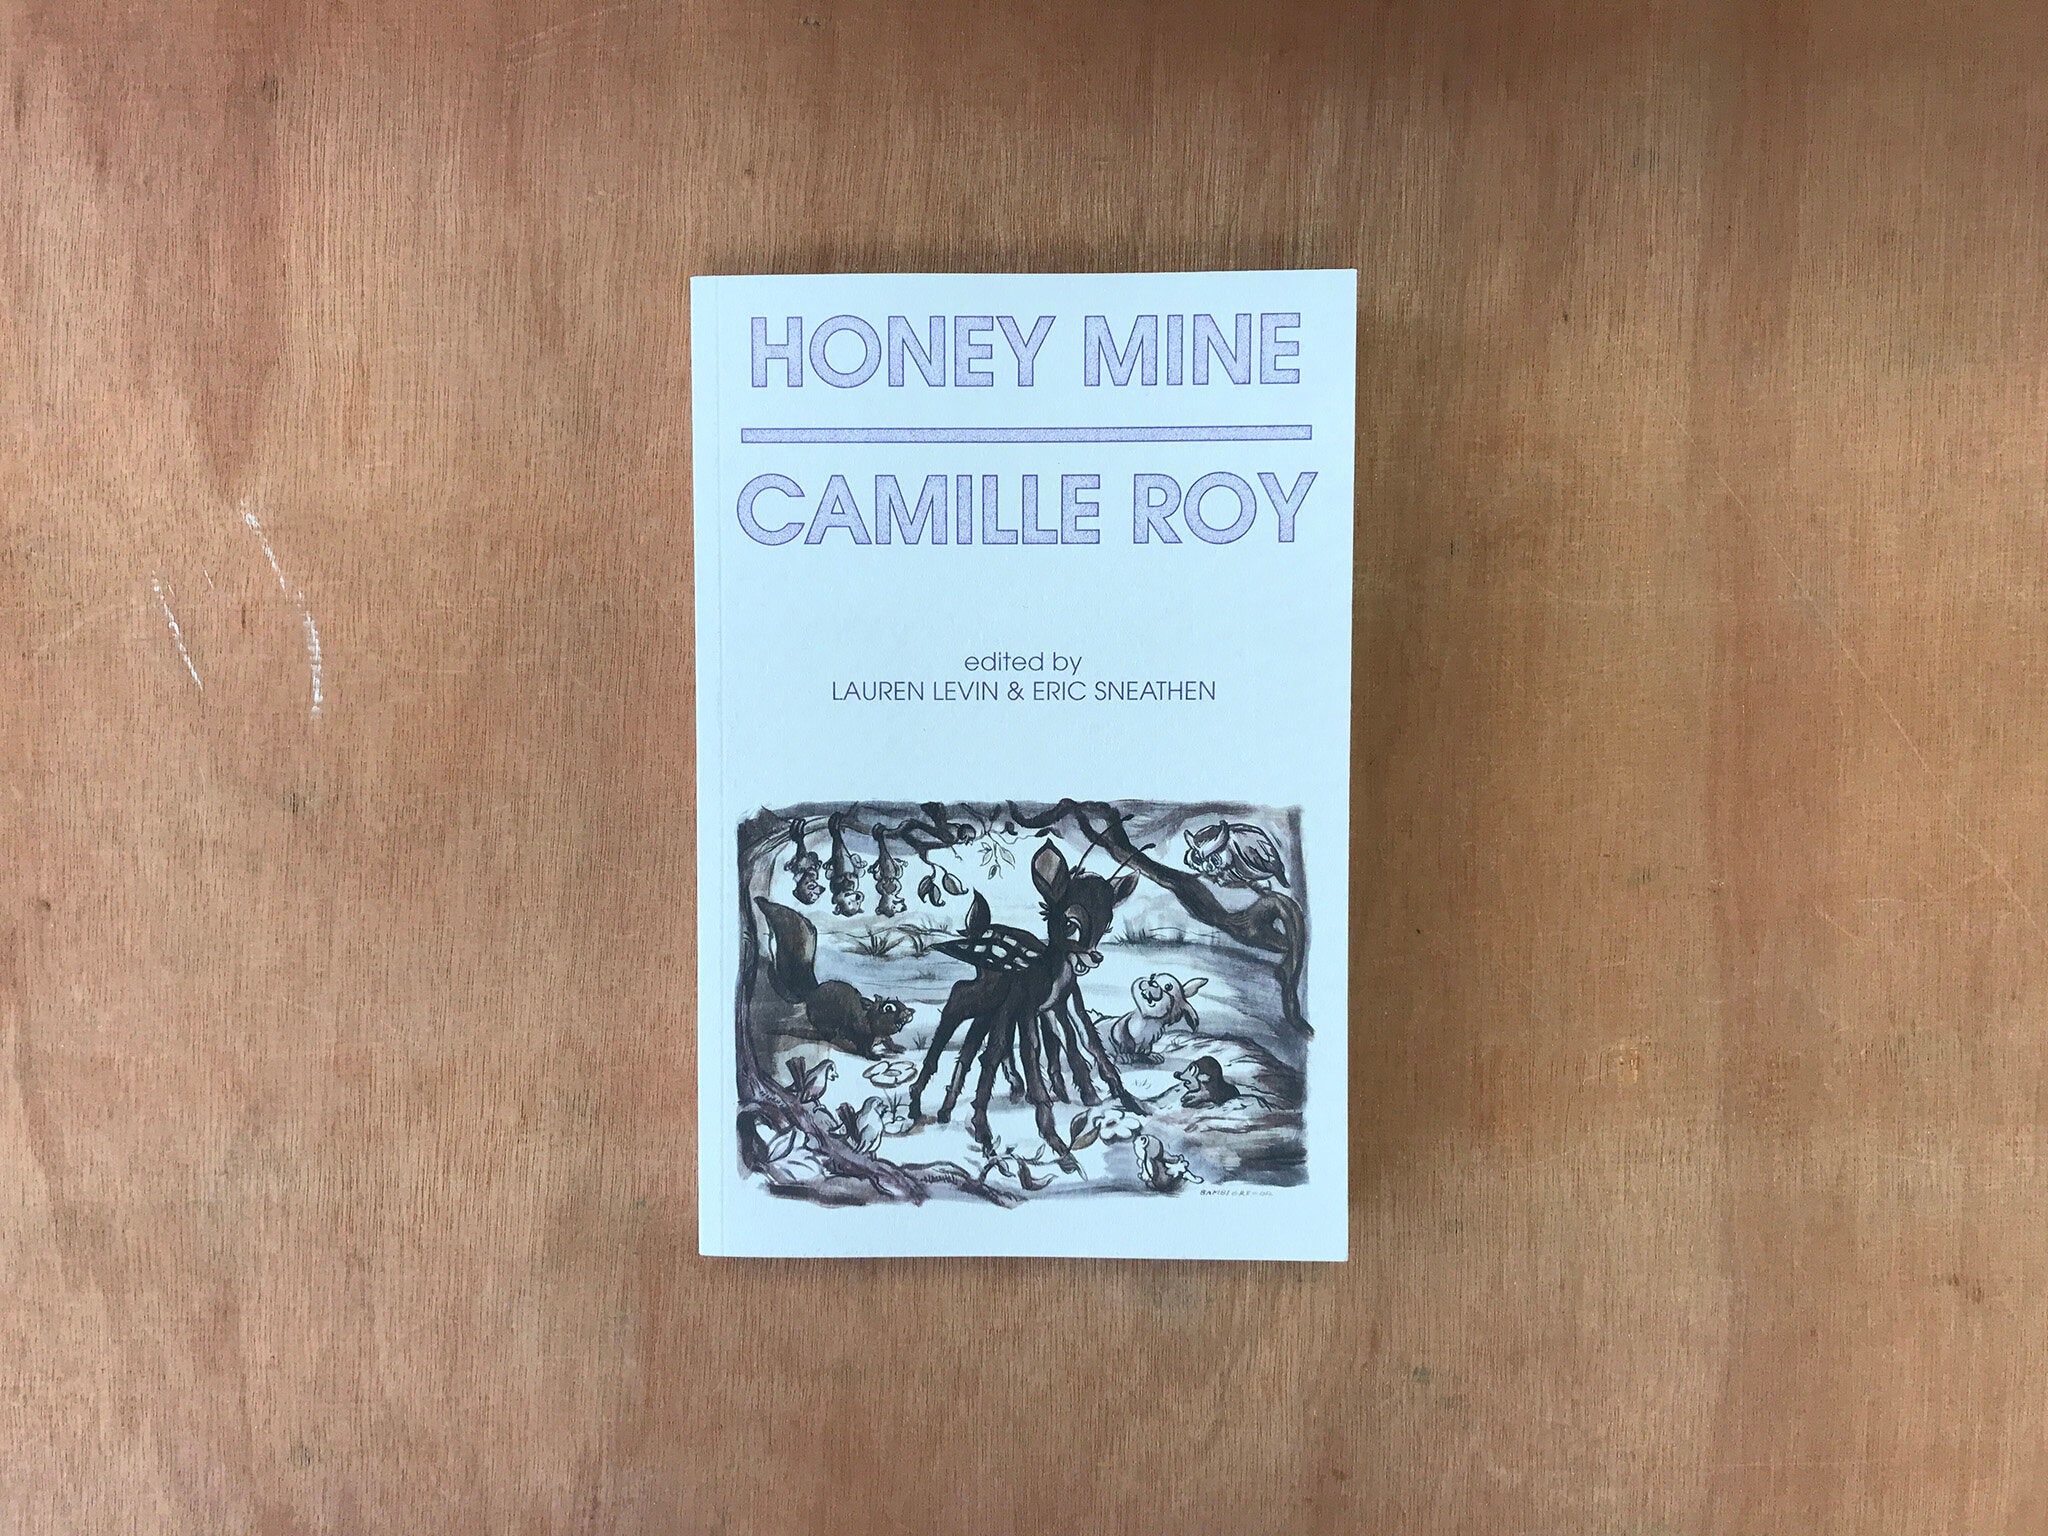 HONEY MINE by Camille Roy